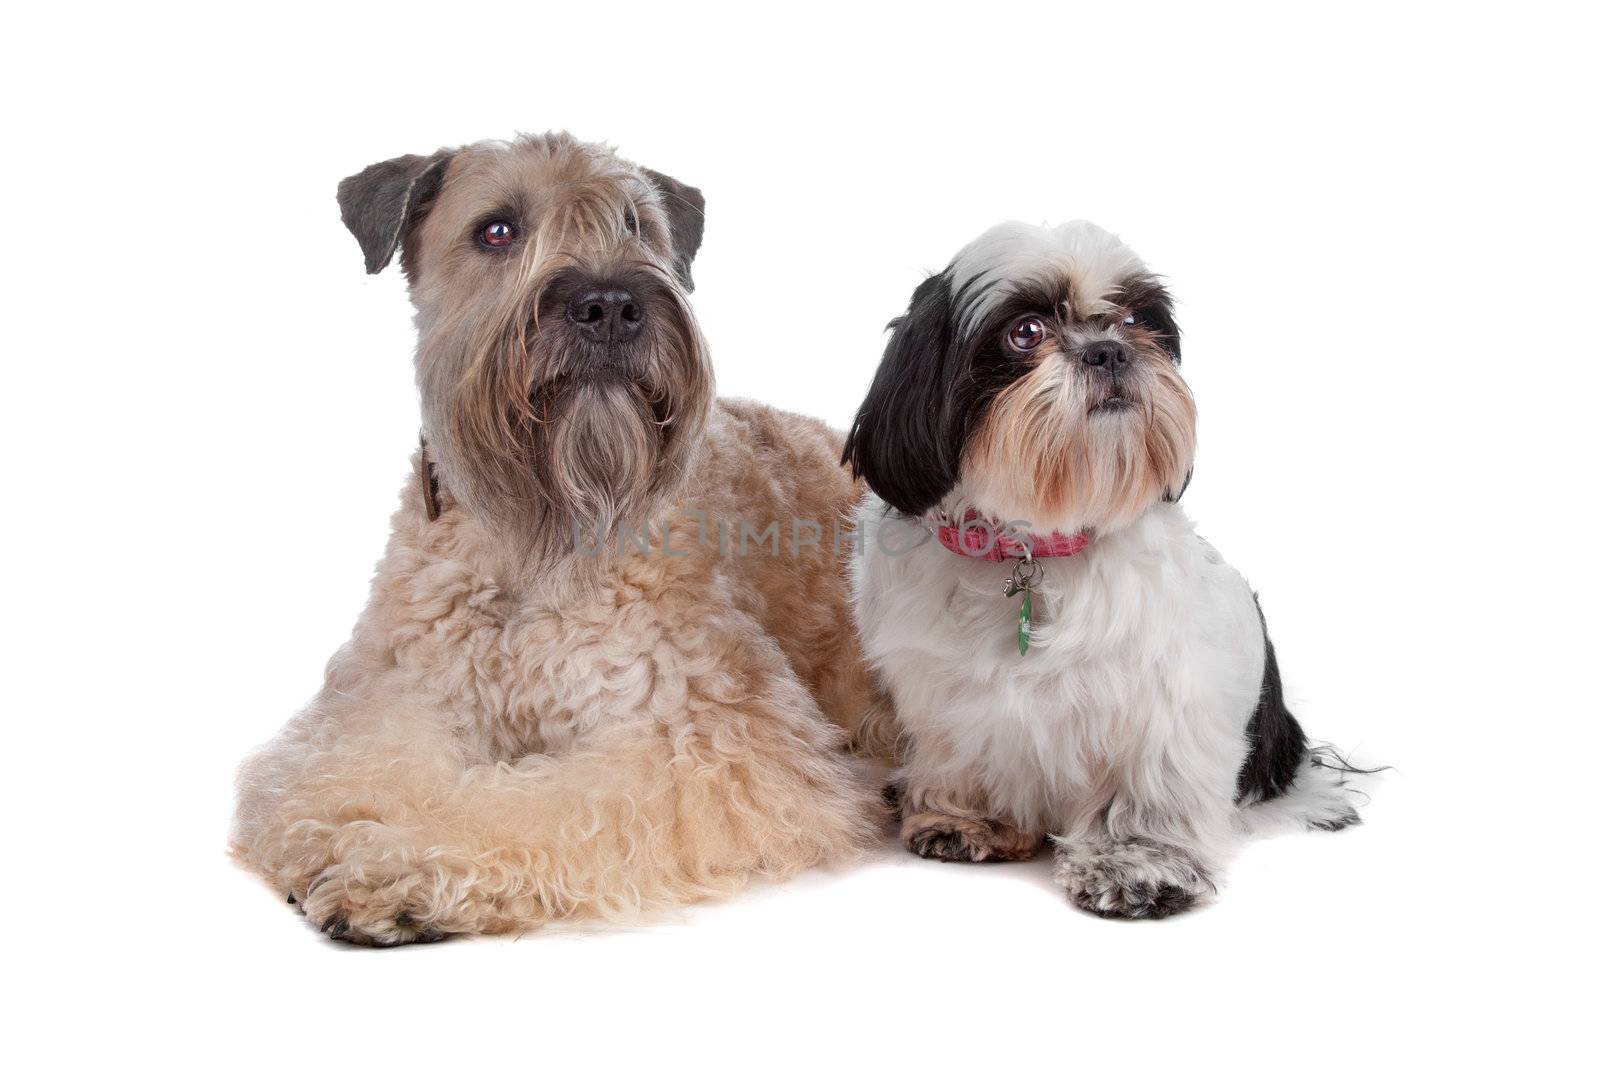 Soft Coated Wheaten Terrier and Shih Tzu dog lying, isolated on a white background